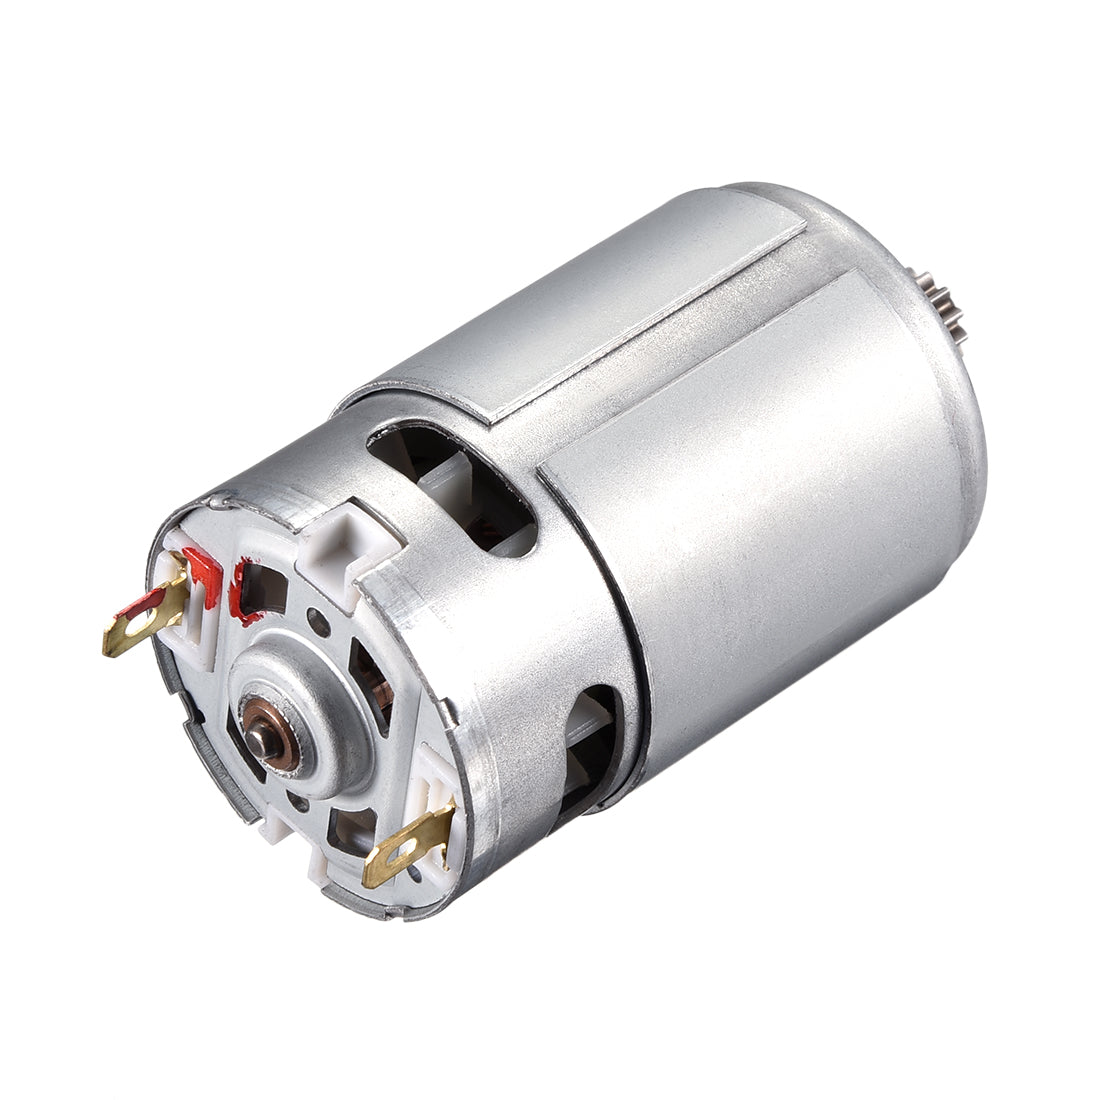 uxcell Uxcell DC 14.4V 20000RPM Electric Gear Motor 12 Teeth for Various Cordless Screwdriver